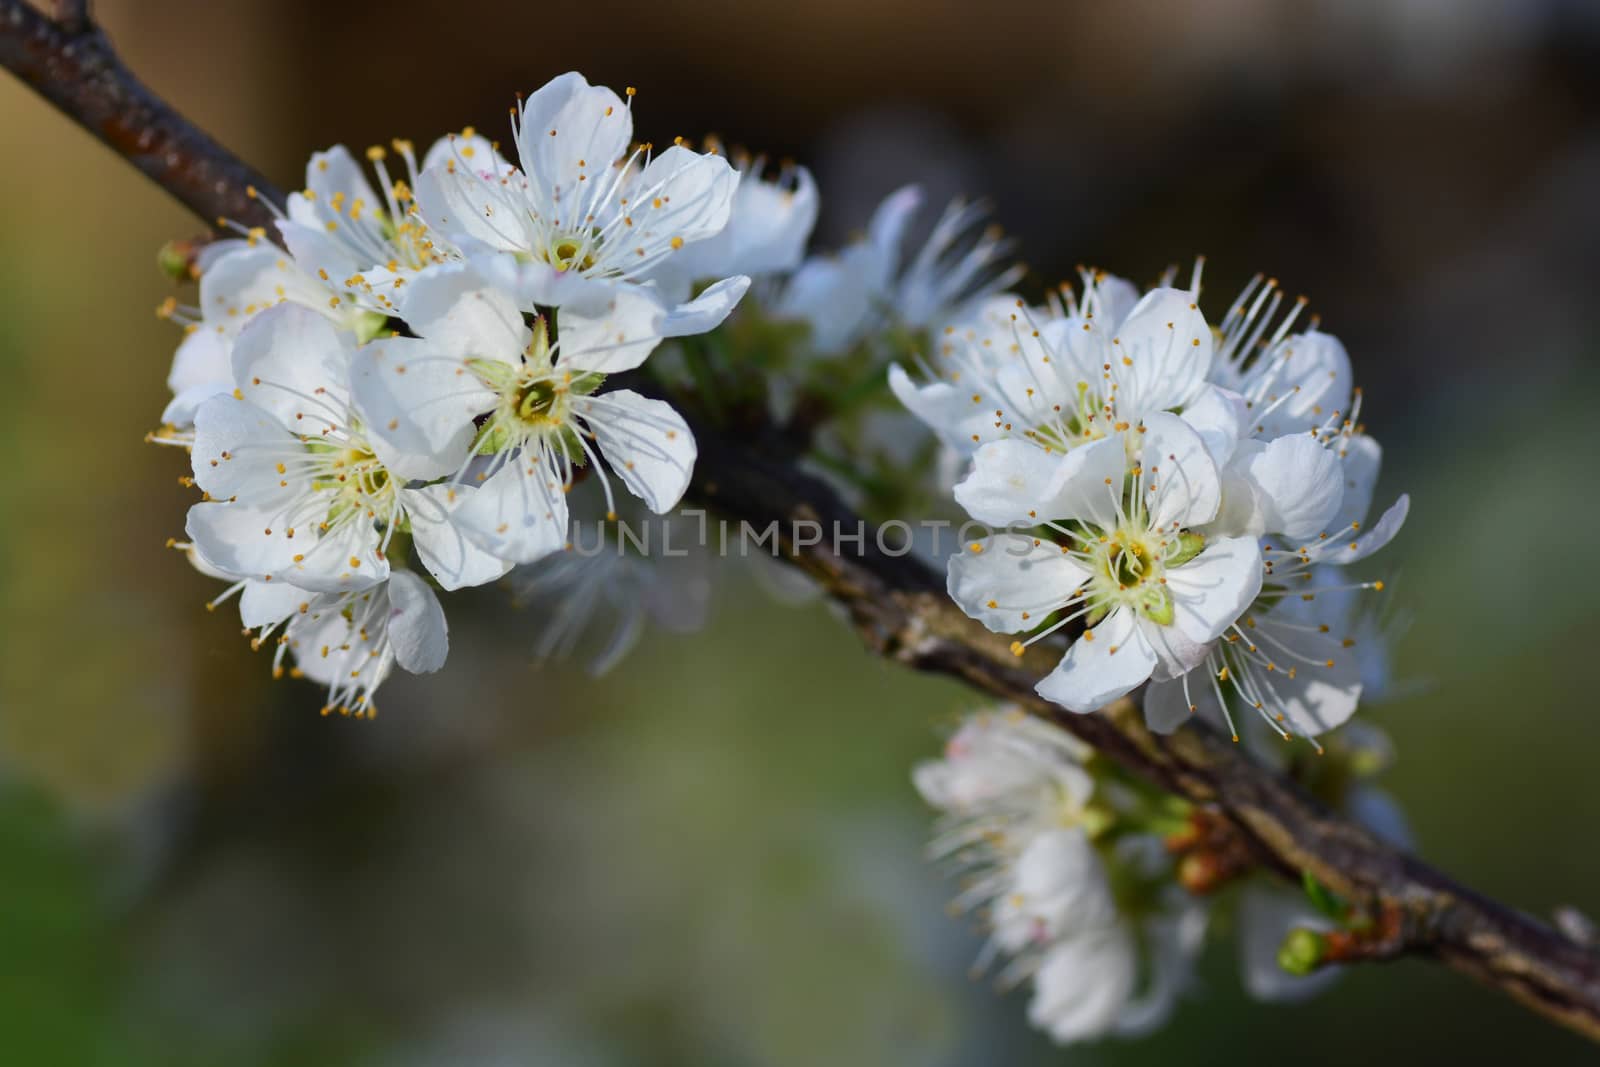 Blooming White Chinese plum flower or Japanese apricot, Korean green plum by ideation90